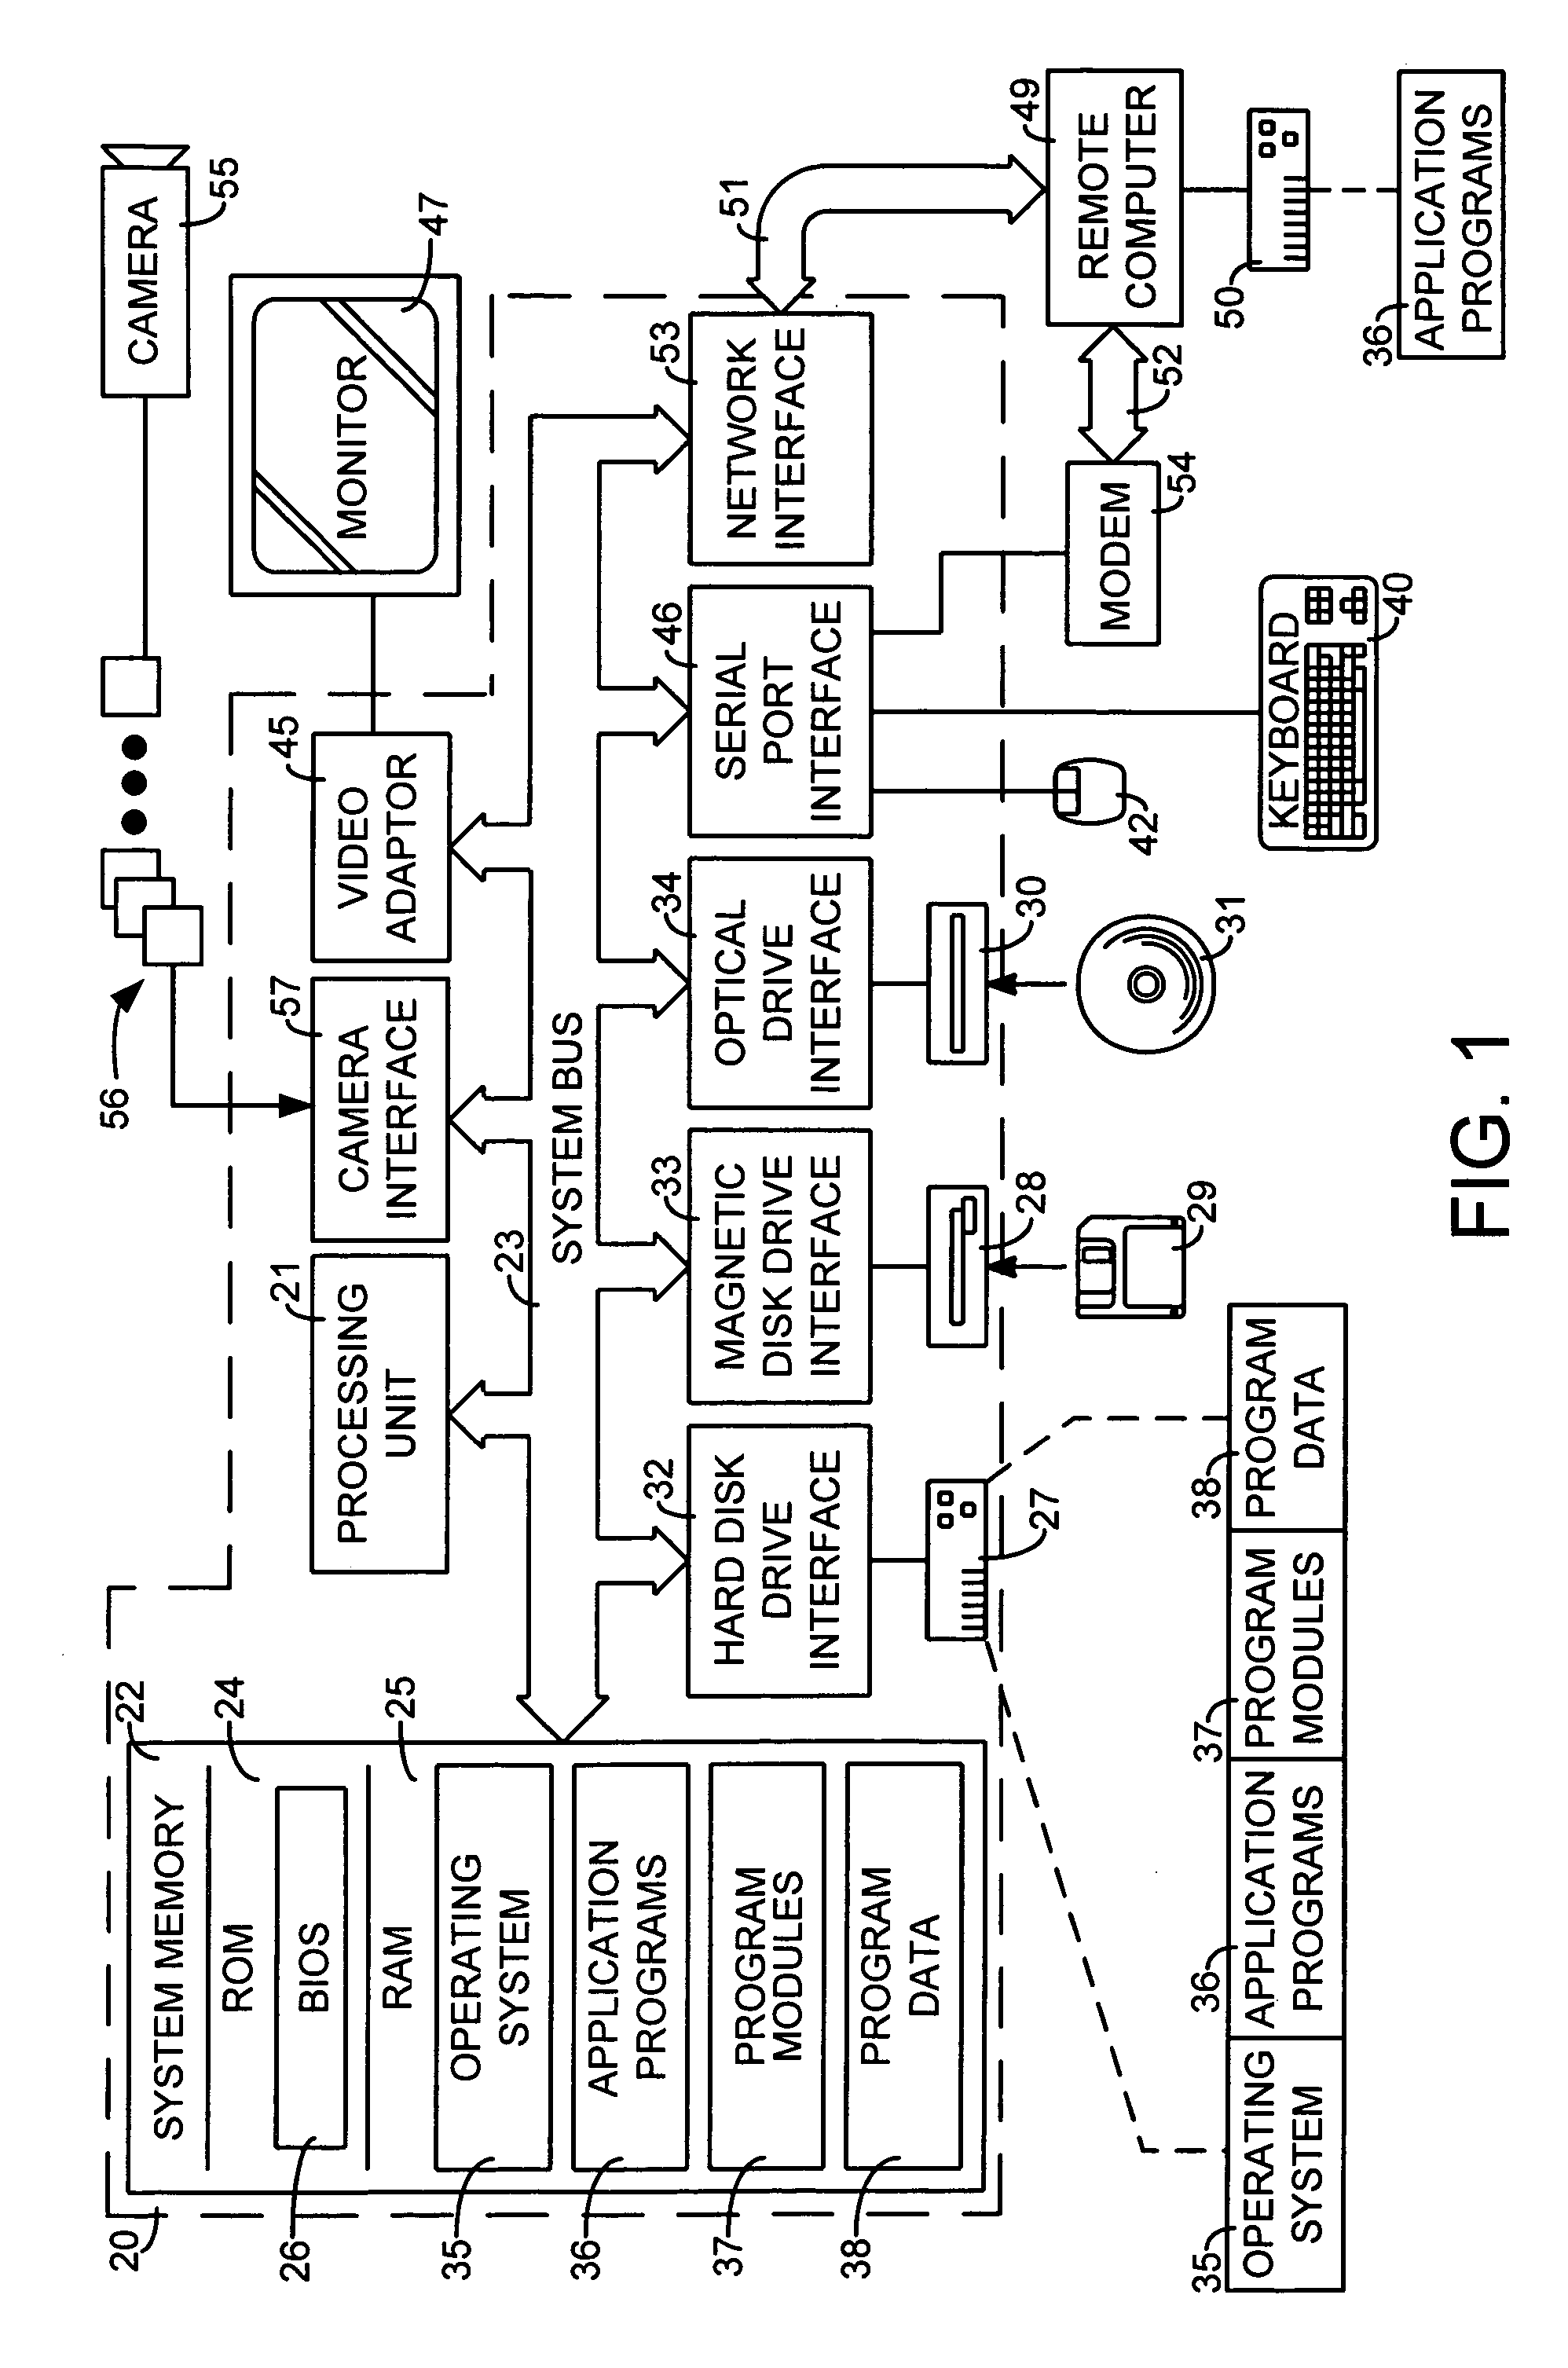 Receiver-driven layered error correction multicast over heterogeneous packet networks